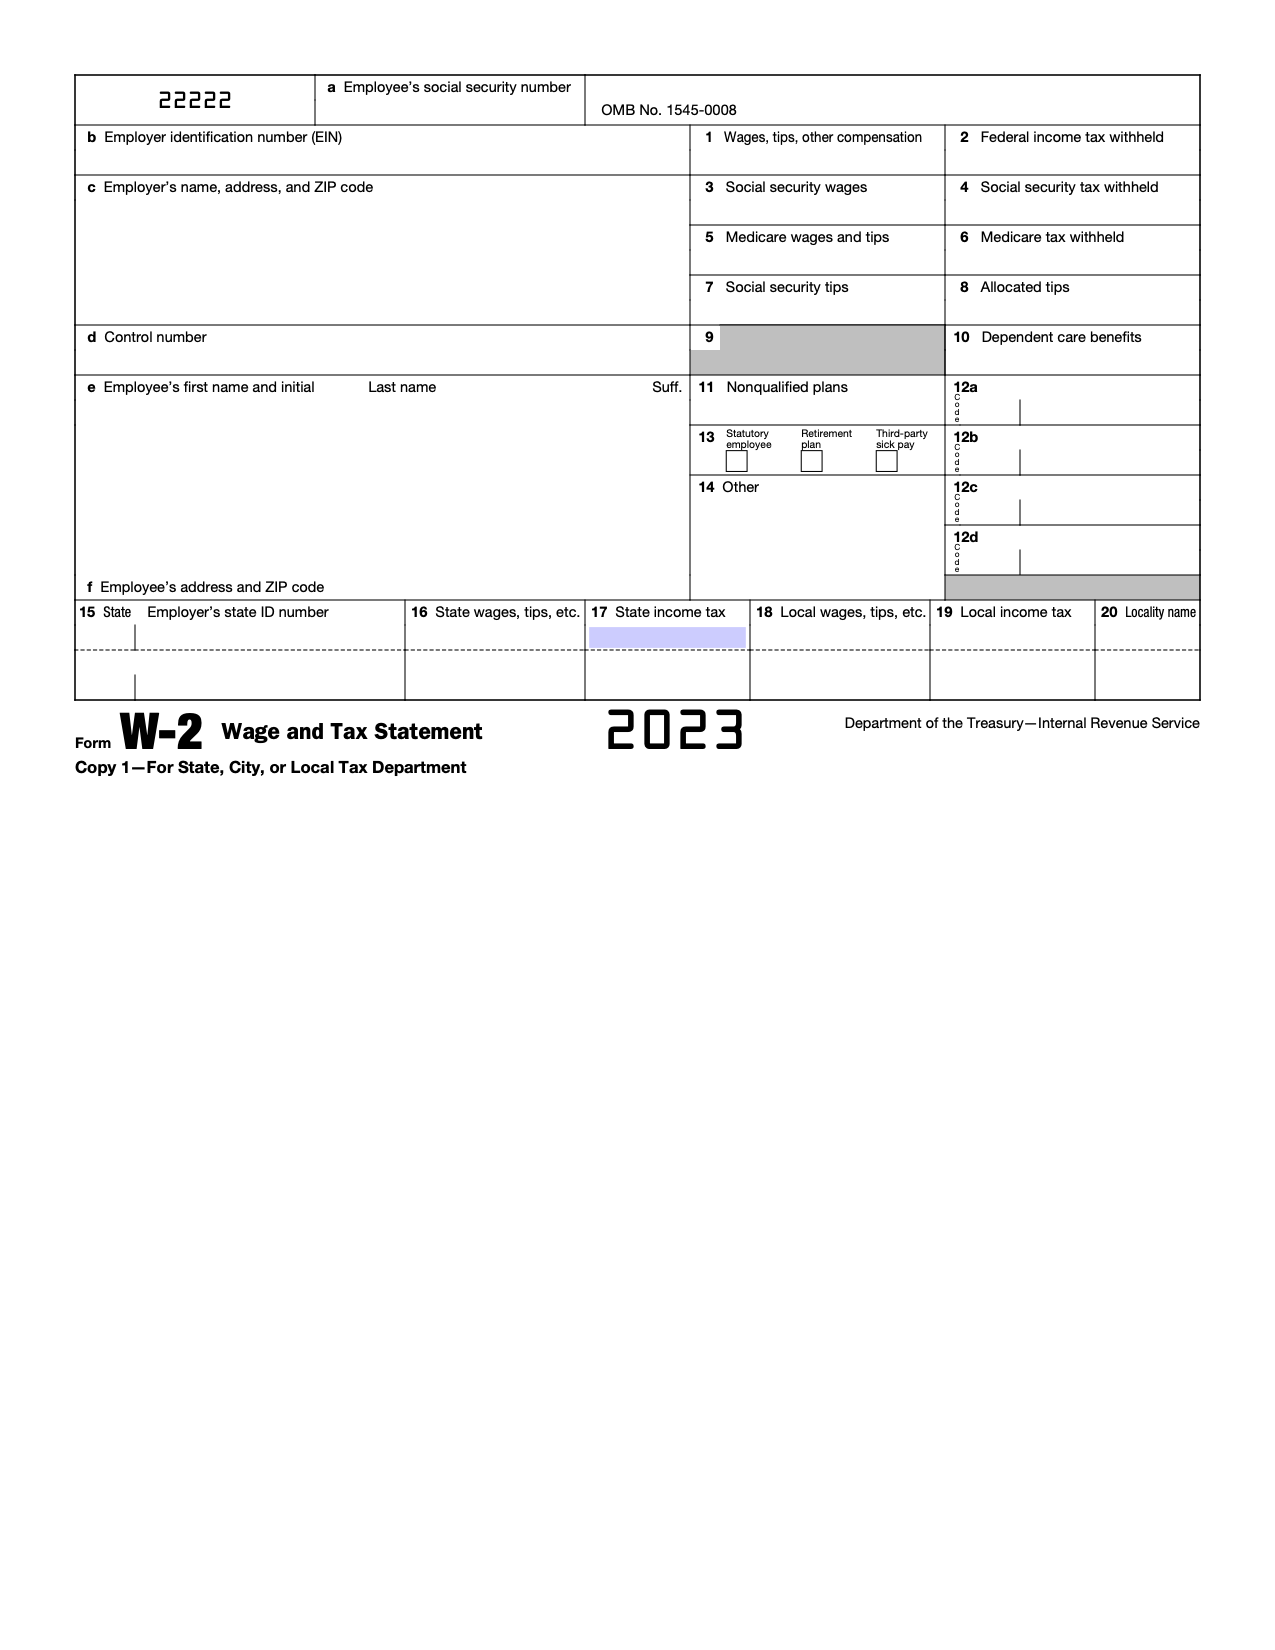 Free Irs Form W-2 | Wage And Tax Statement - Pdf – Eforms inside Create W2 Form Online Free